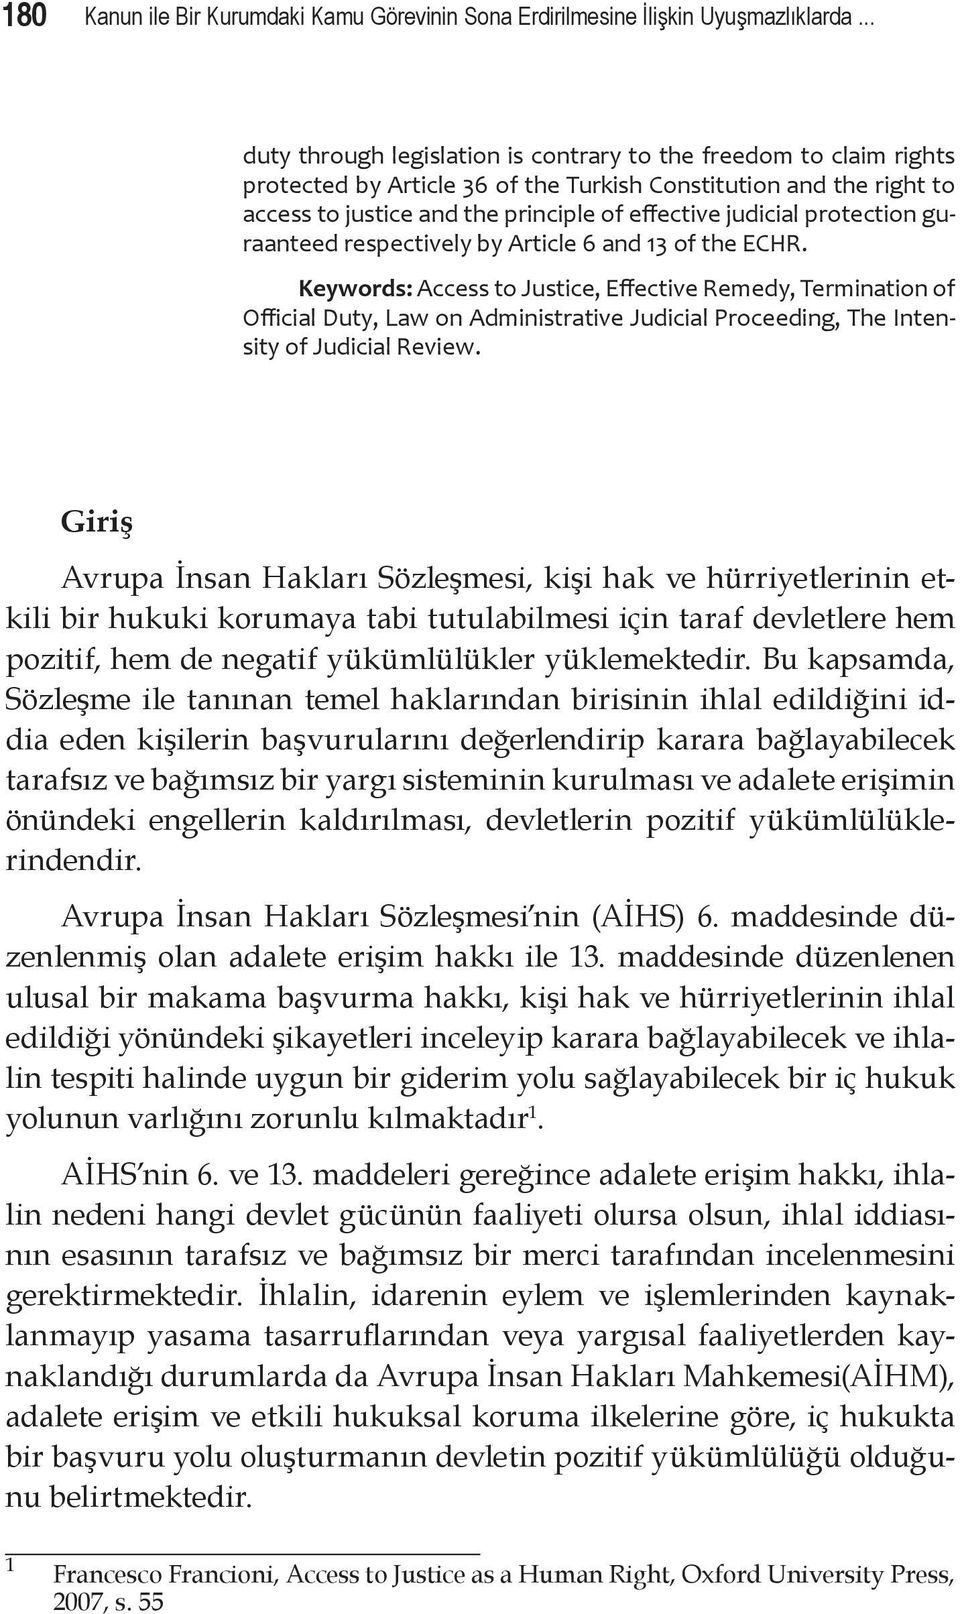 protection guraanteed respectively by Article 6 and 13 of the ECHR.